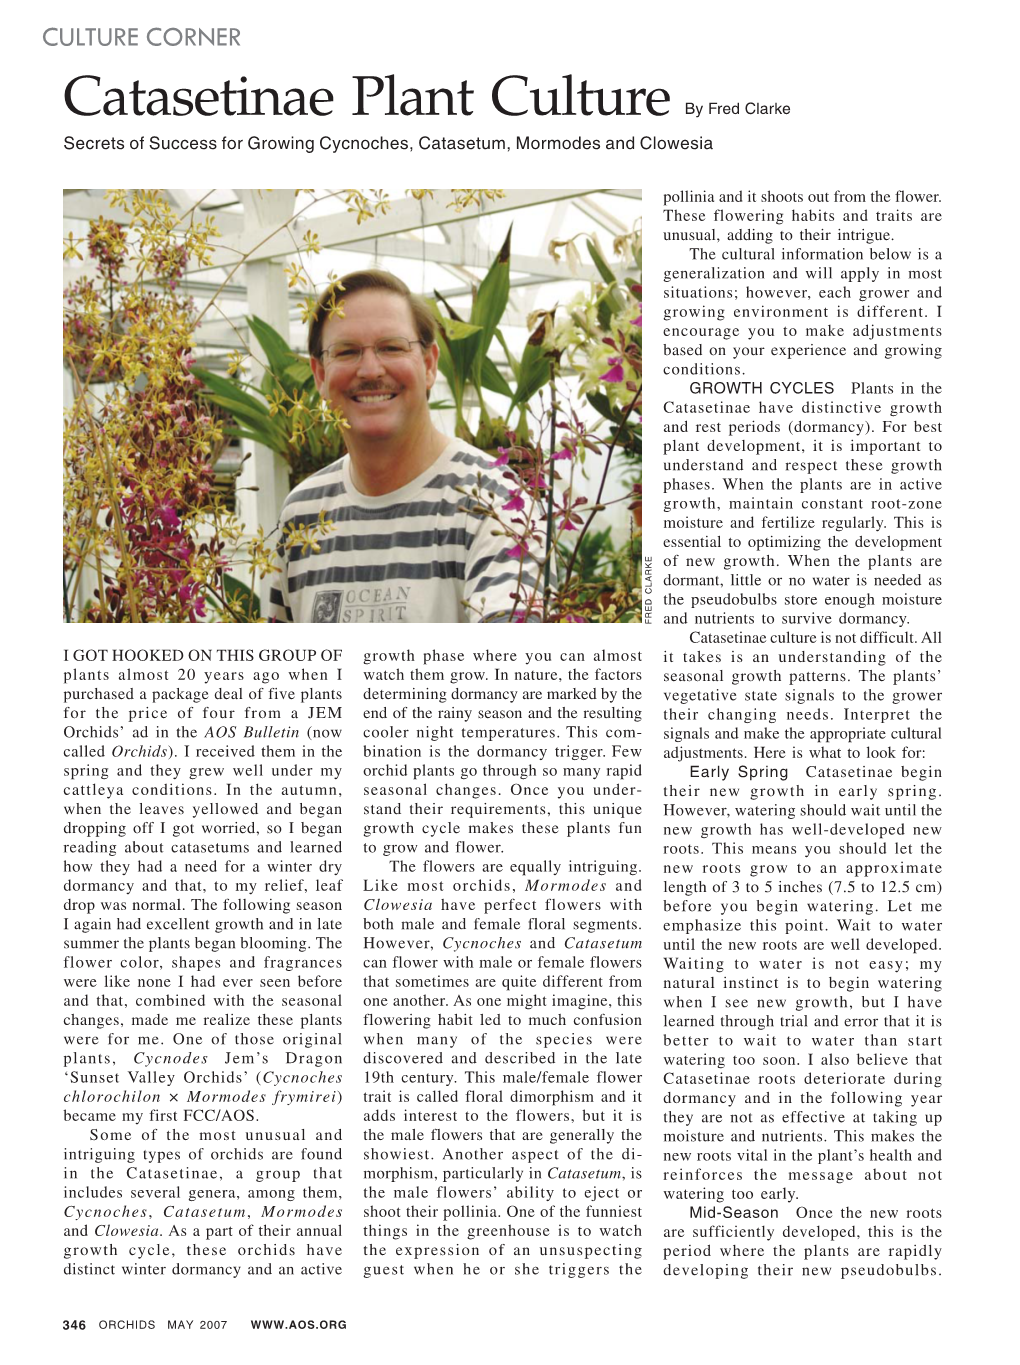 Catasetinae Plant Culture by Fred Clarke Secrets of Success for Growing Cycnoches, Catasetum, Mormodes and Clowesia